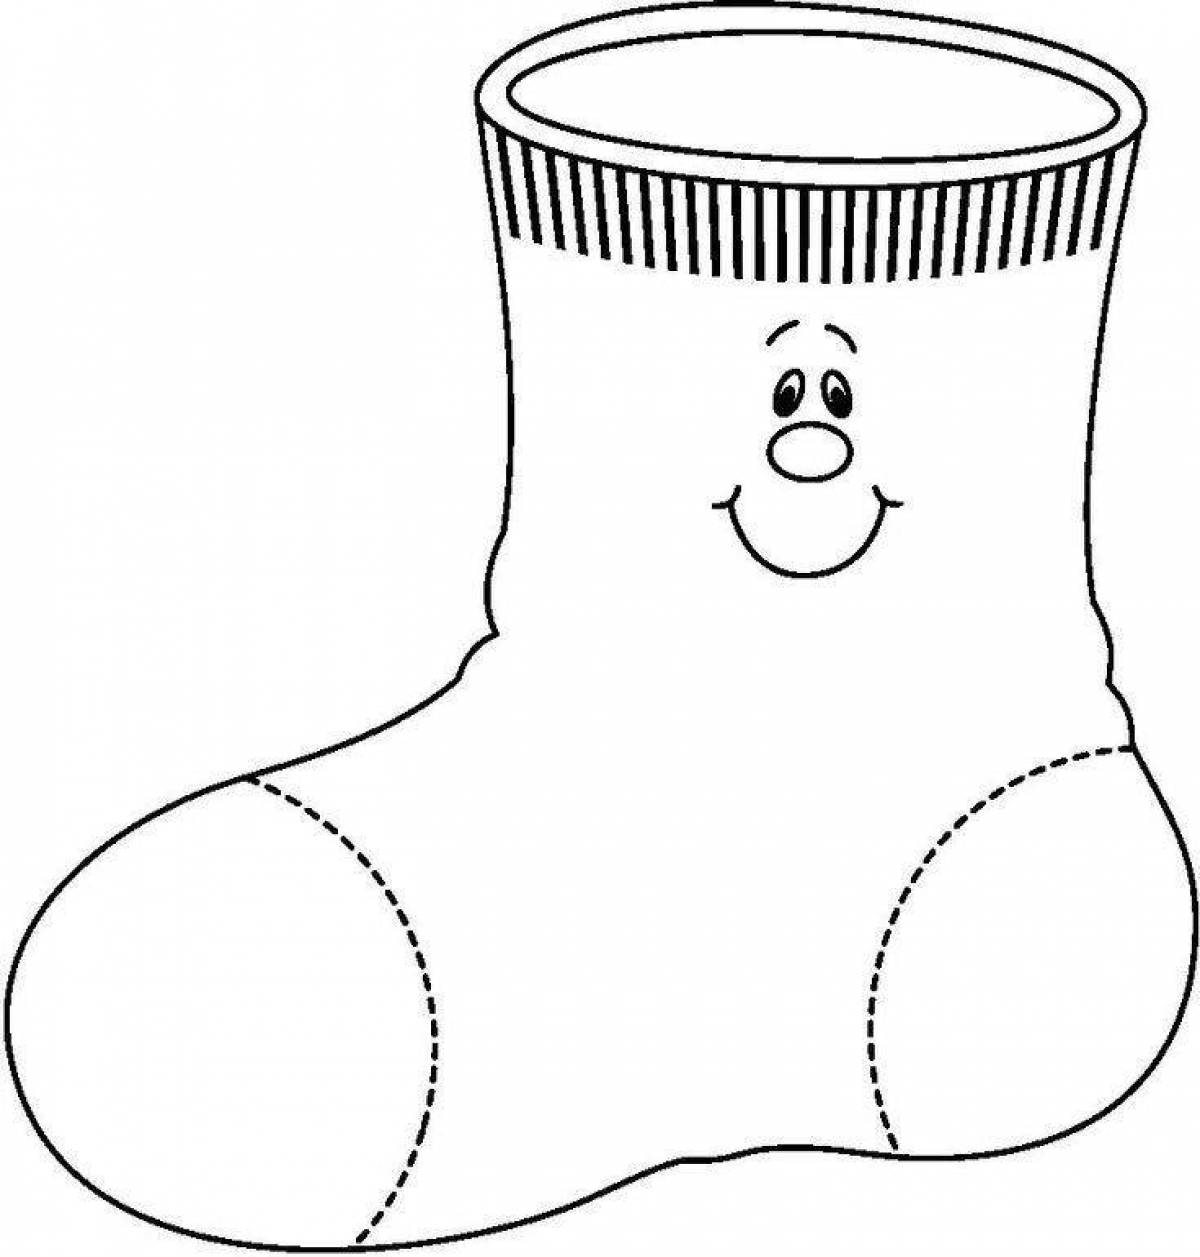 Gorgeous boots coloring page for kids